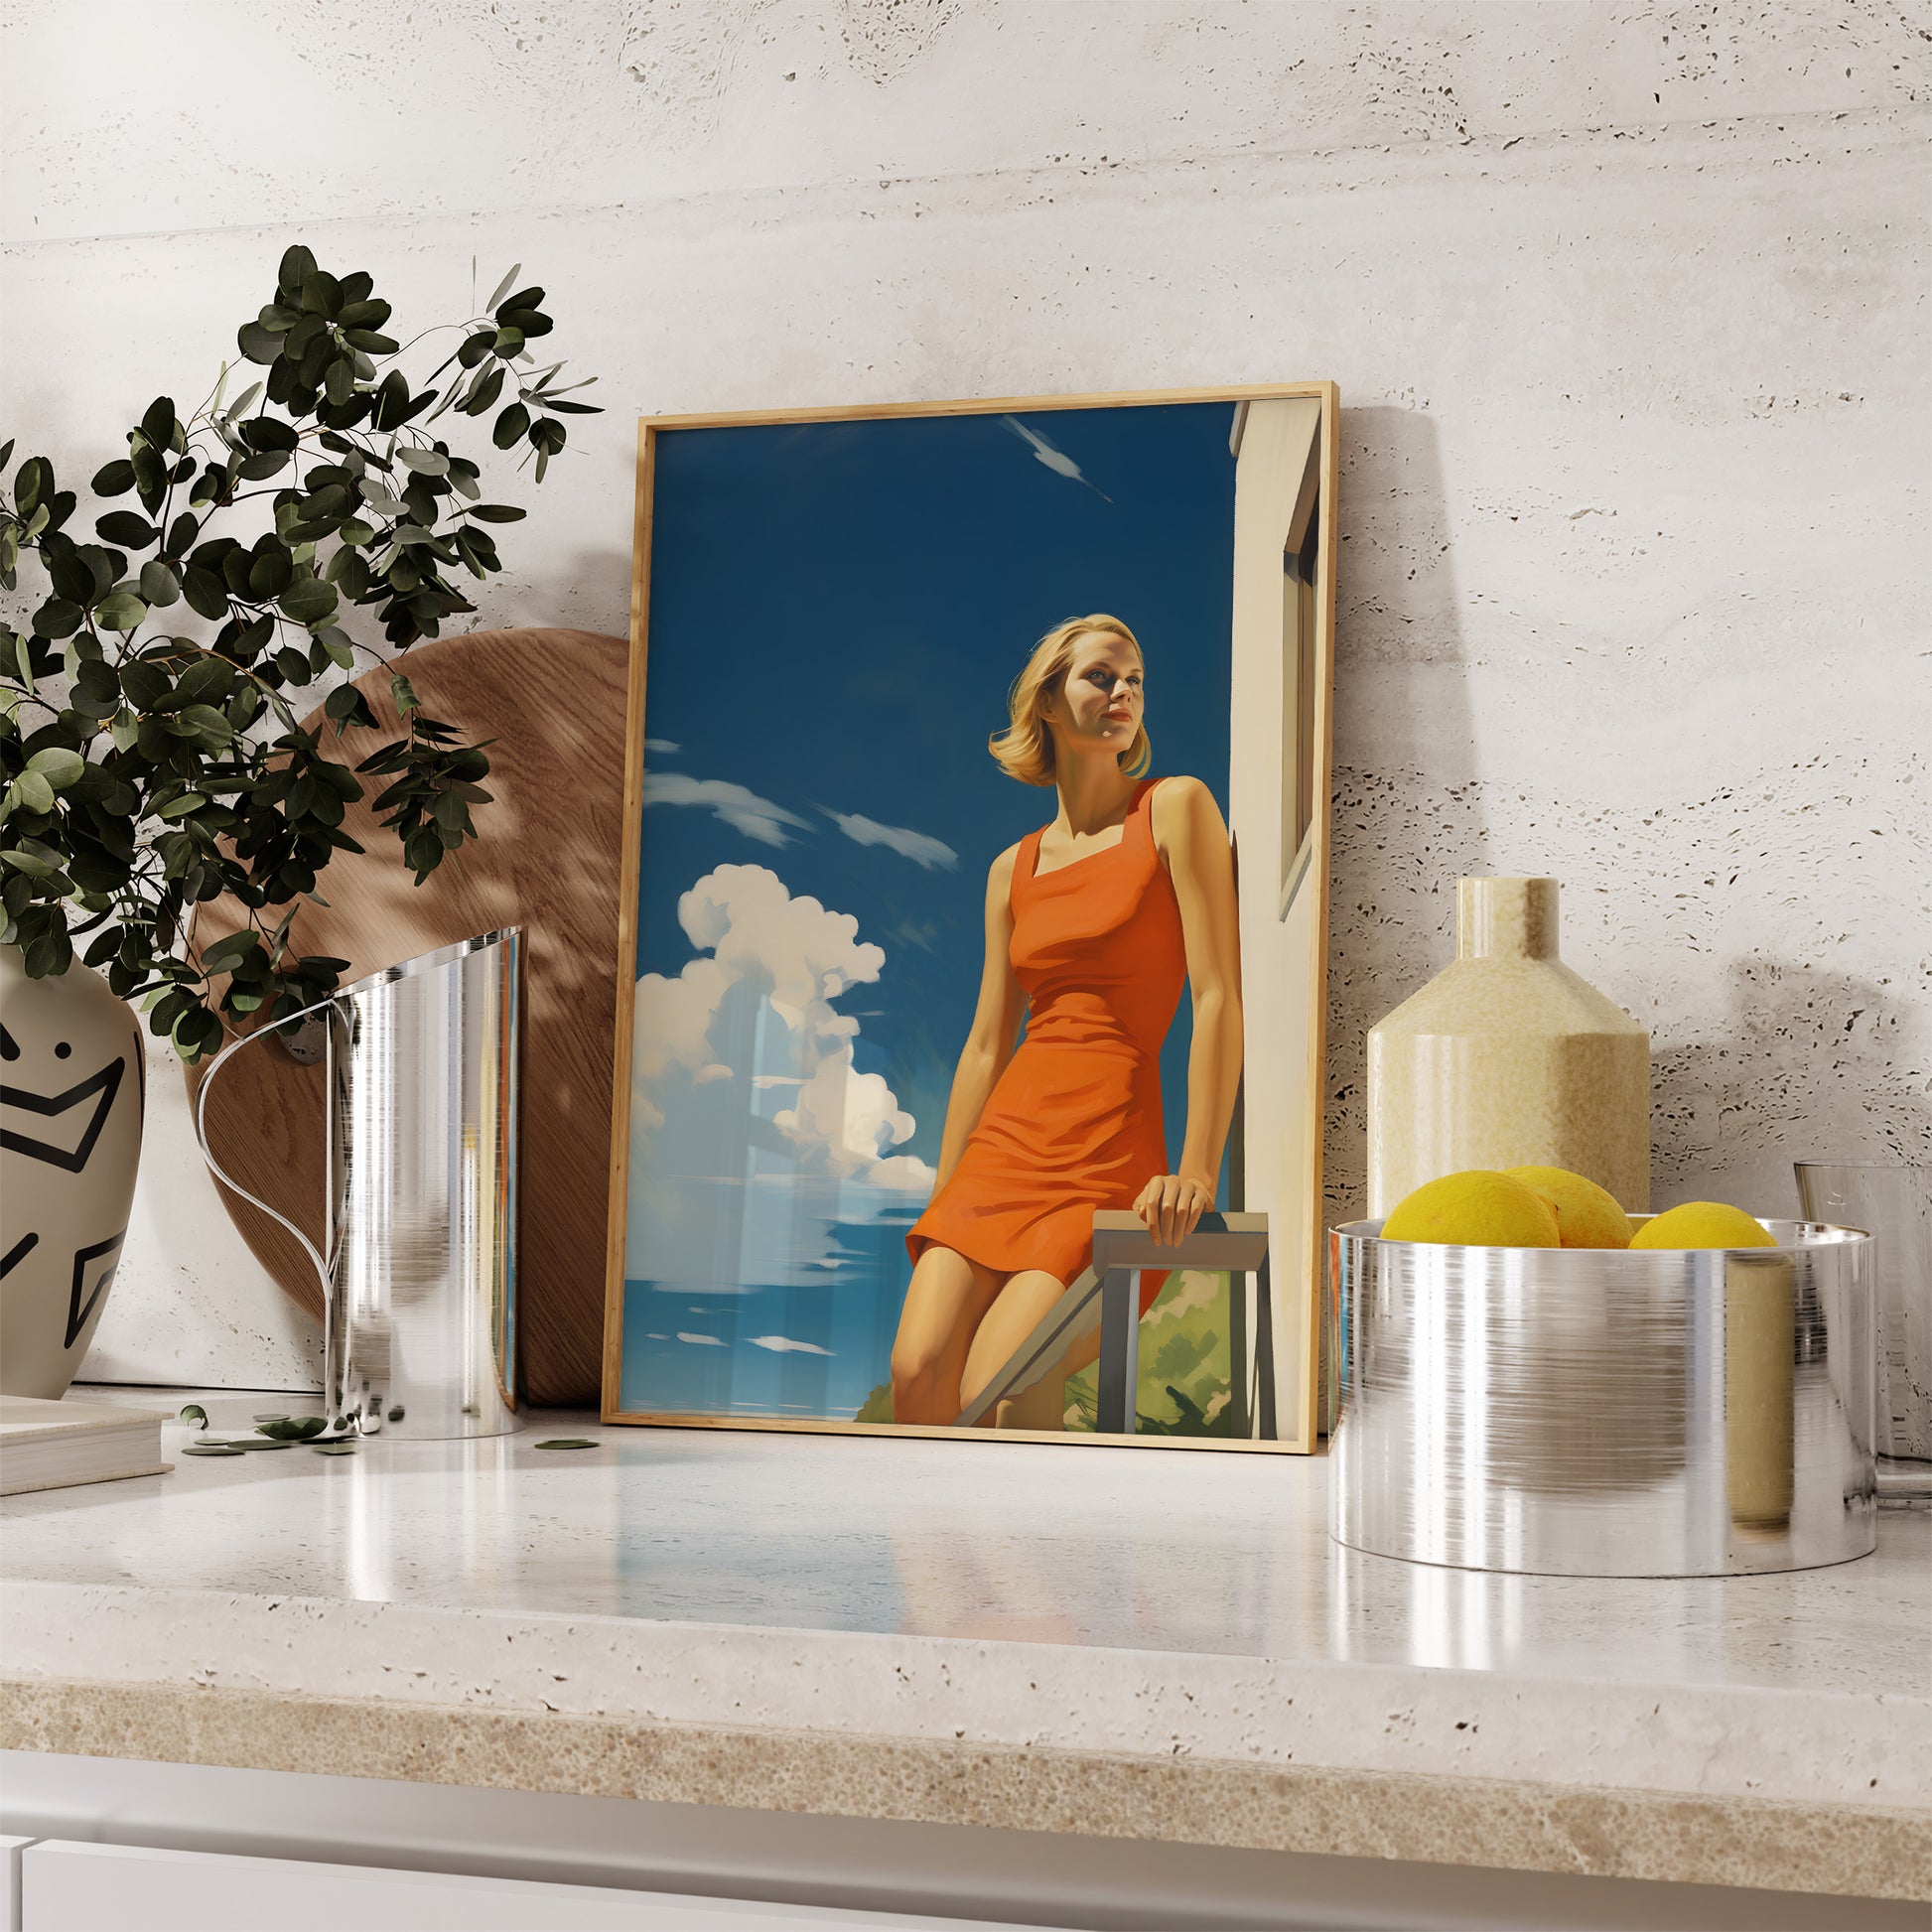 A framed portrait of a woman in an orange dress leaning on a railing, displayed on a shelf with decorative items.